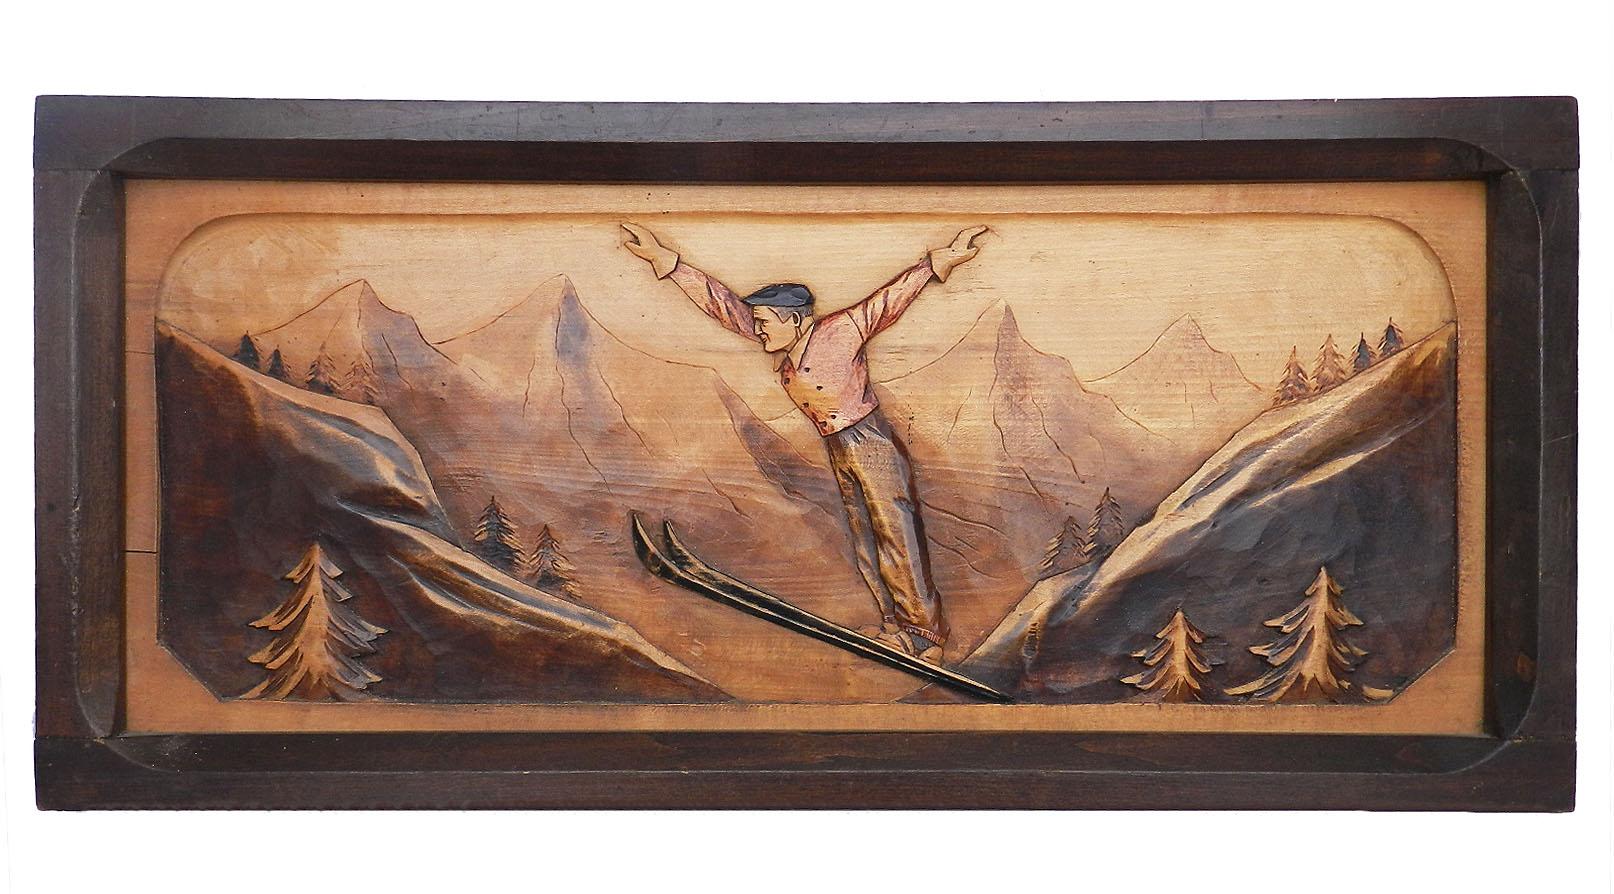 Art Deco Wall Plaque of a Basque Skier in the Pyrenees Mountains carved wood c1930
Bas relief sculpture
Very good condition well executed with highlight colours to wood now slightly faded due to age which has enhanced its character ...glorious